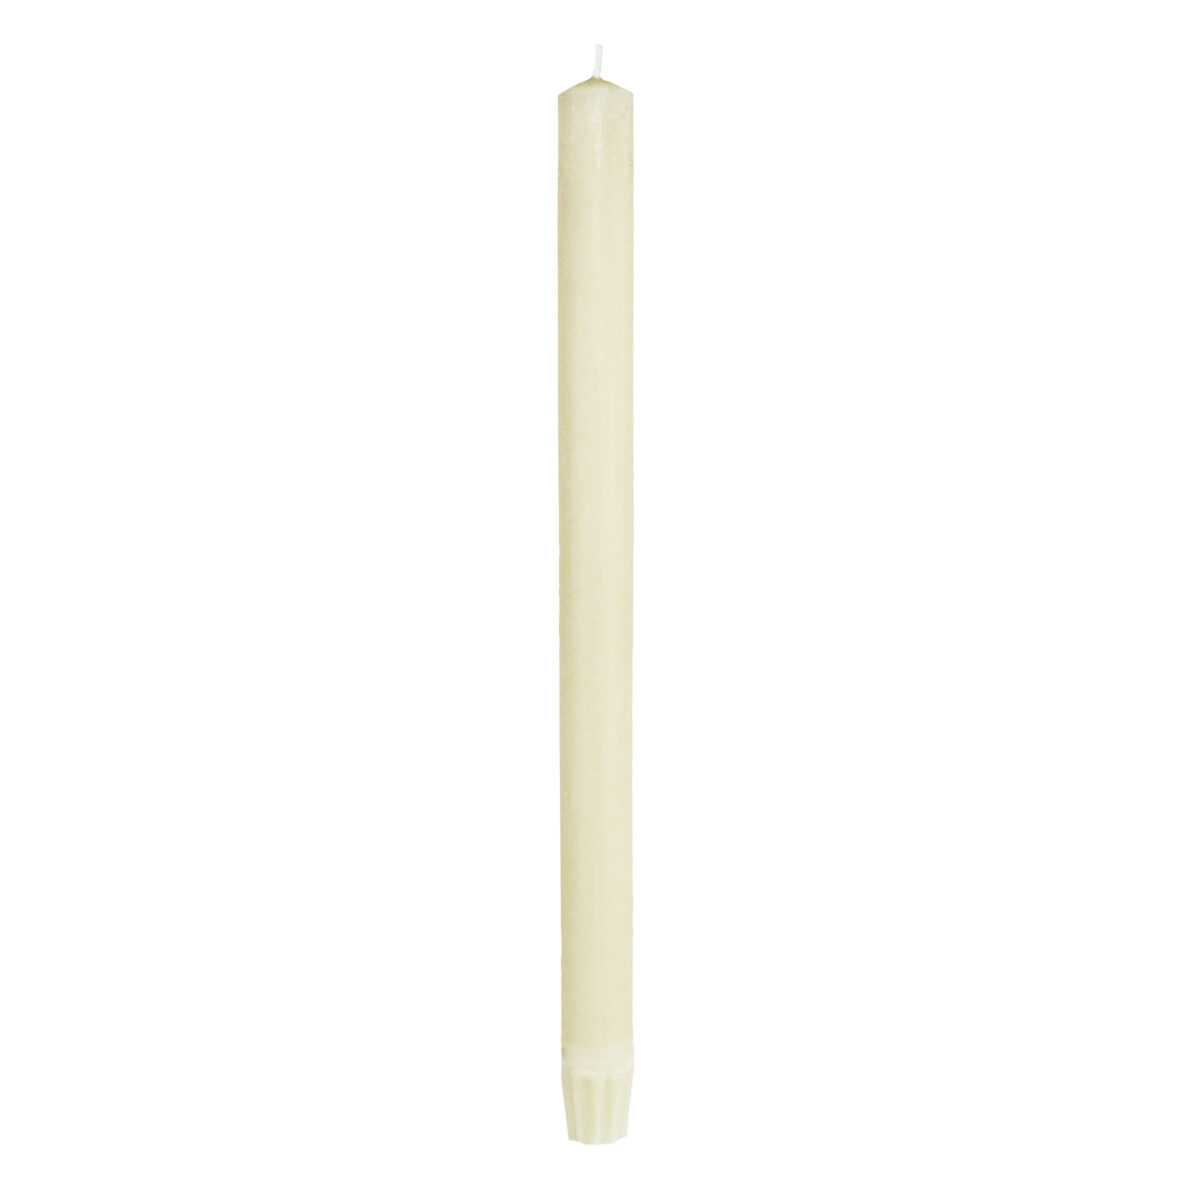 51% BEESWAX 1" x 12-1/2" SELF FITTING END CANDLE STICK